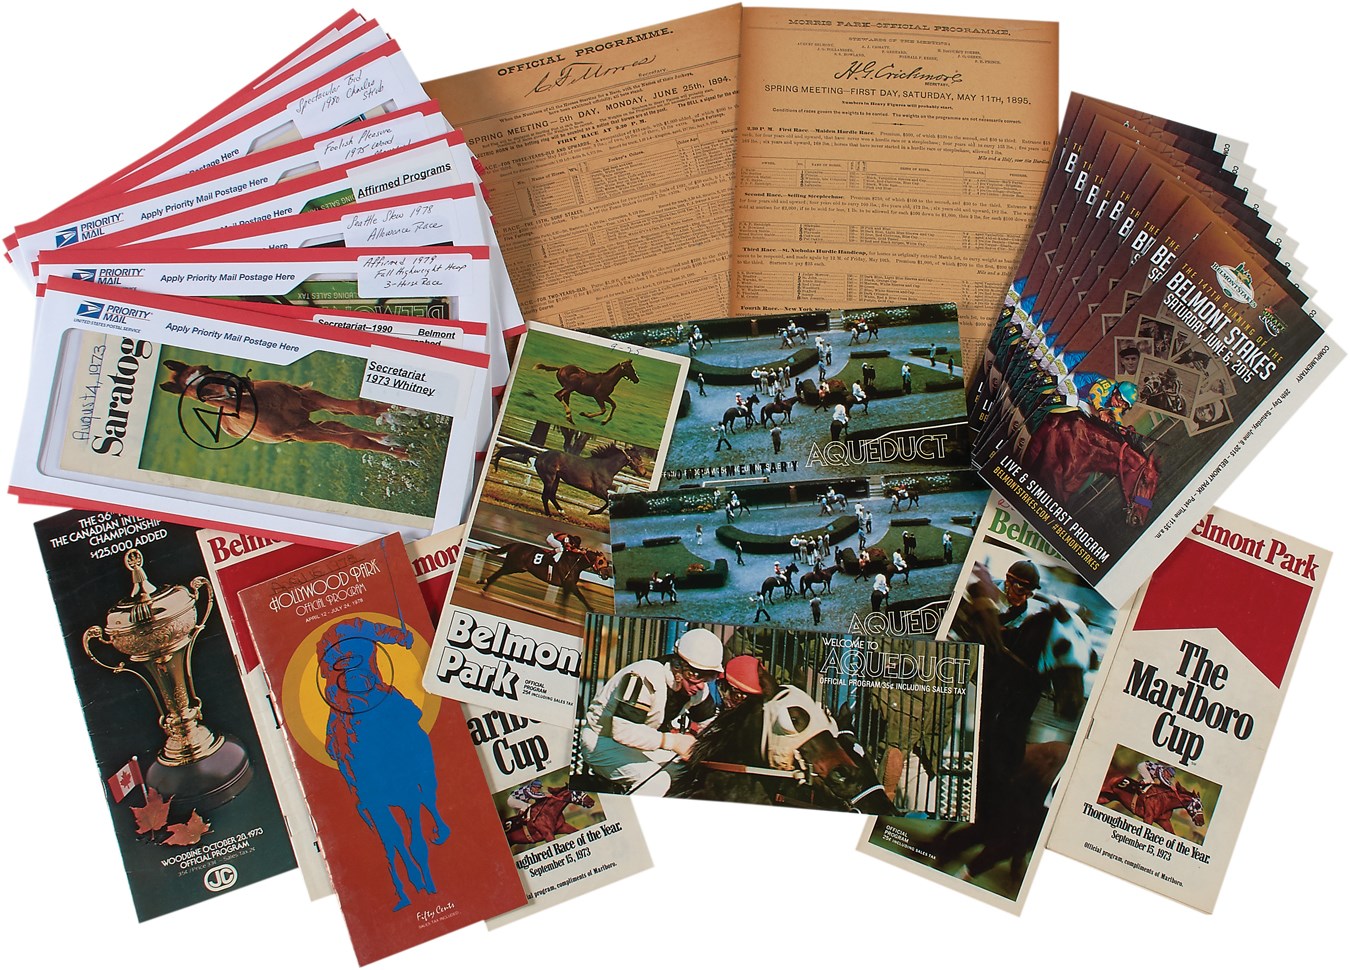 - Important Horse Racing Program Collection - with Seabiscuit, Secretariat, War Admiral (700+)